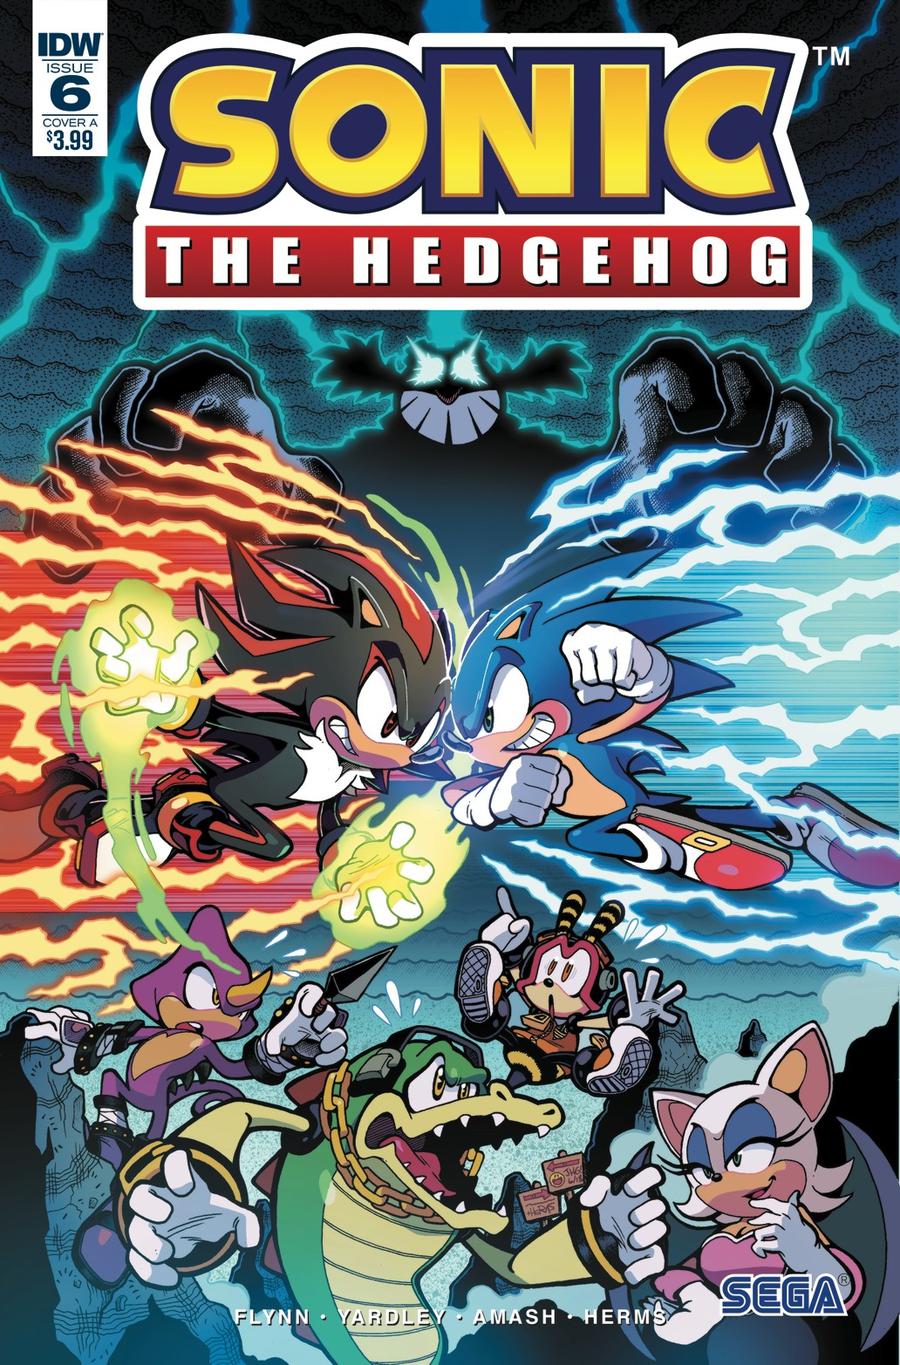 Sonic The Hedgehog Vol 3 #6 Cover A Regular Tracy Yardley Cover